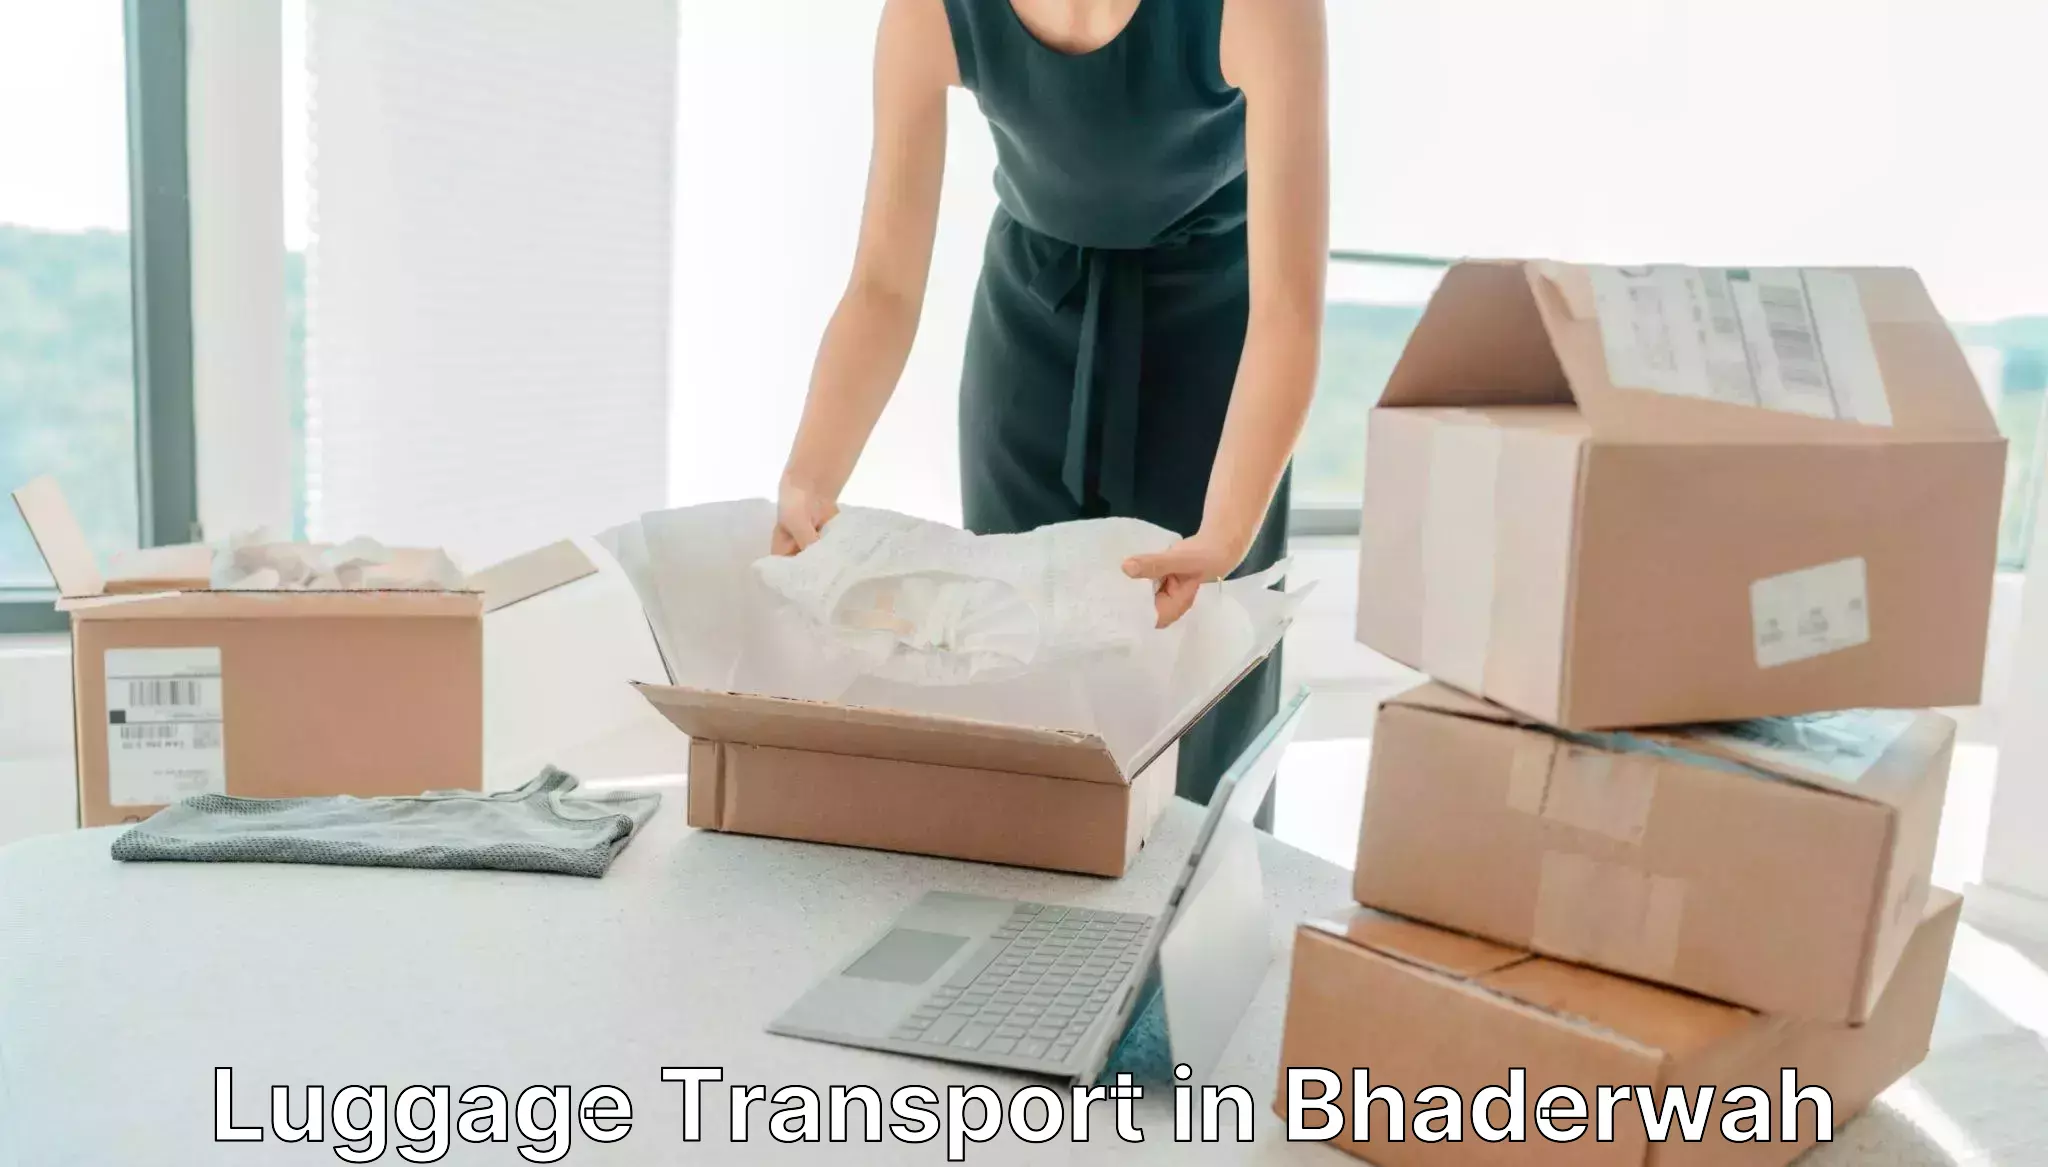 High-quality baggage shipment in Bhaderwah